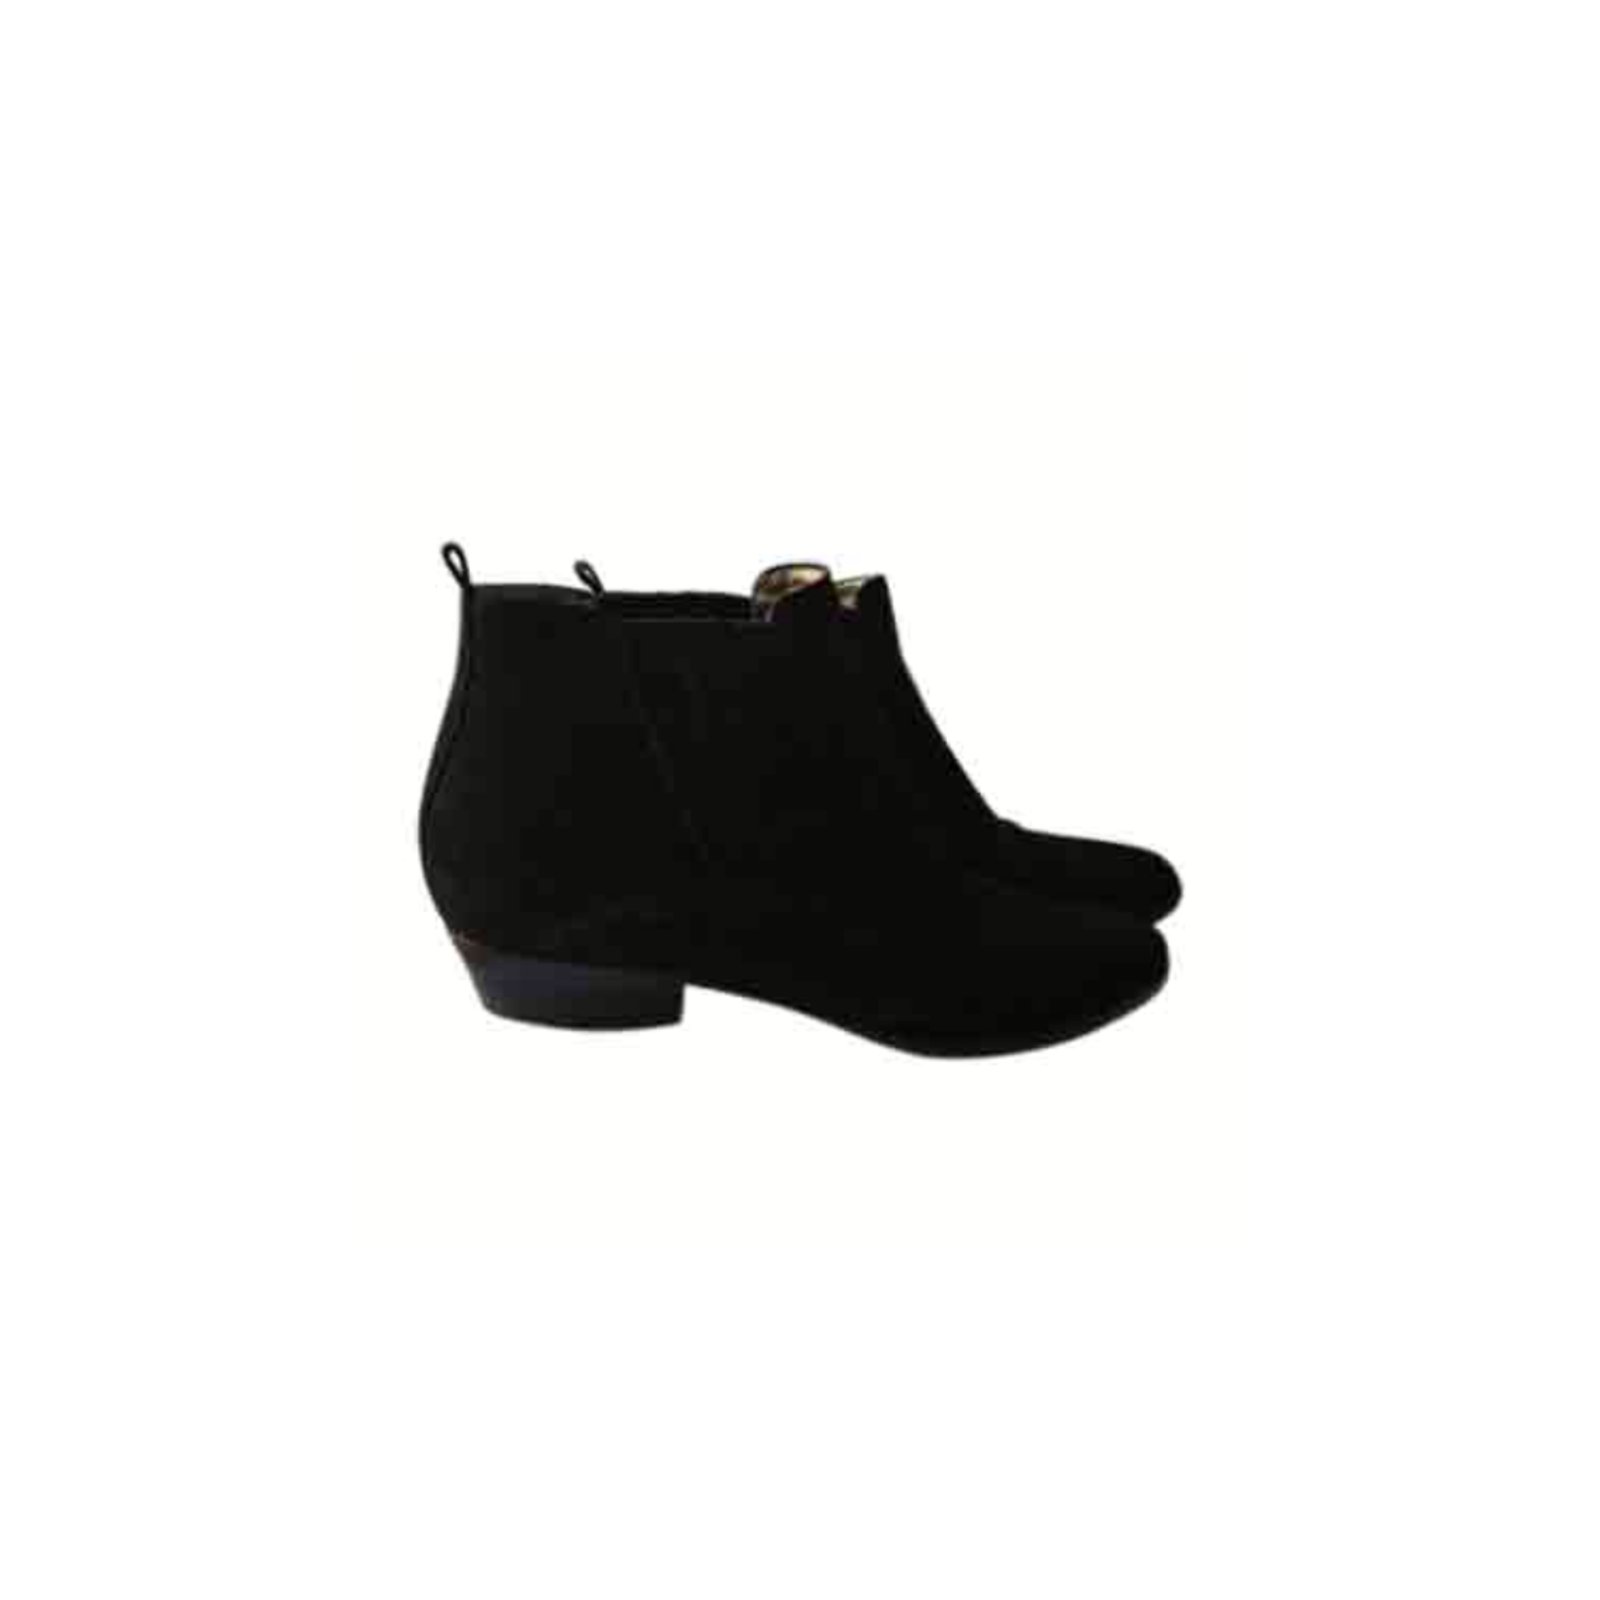 presley ankle boots in black